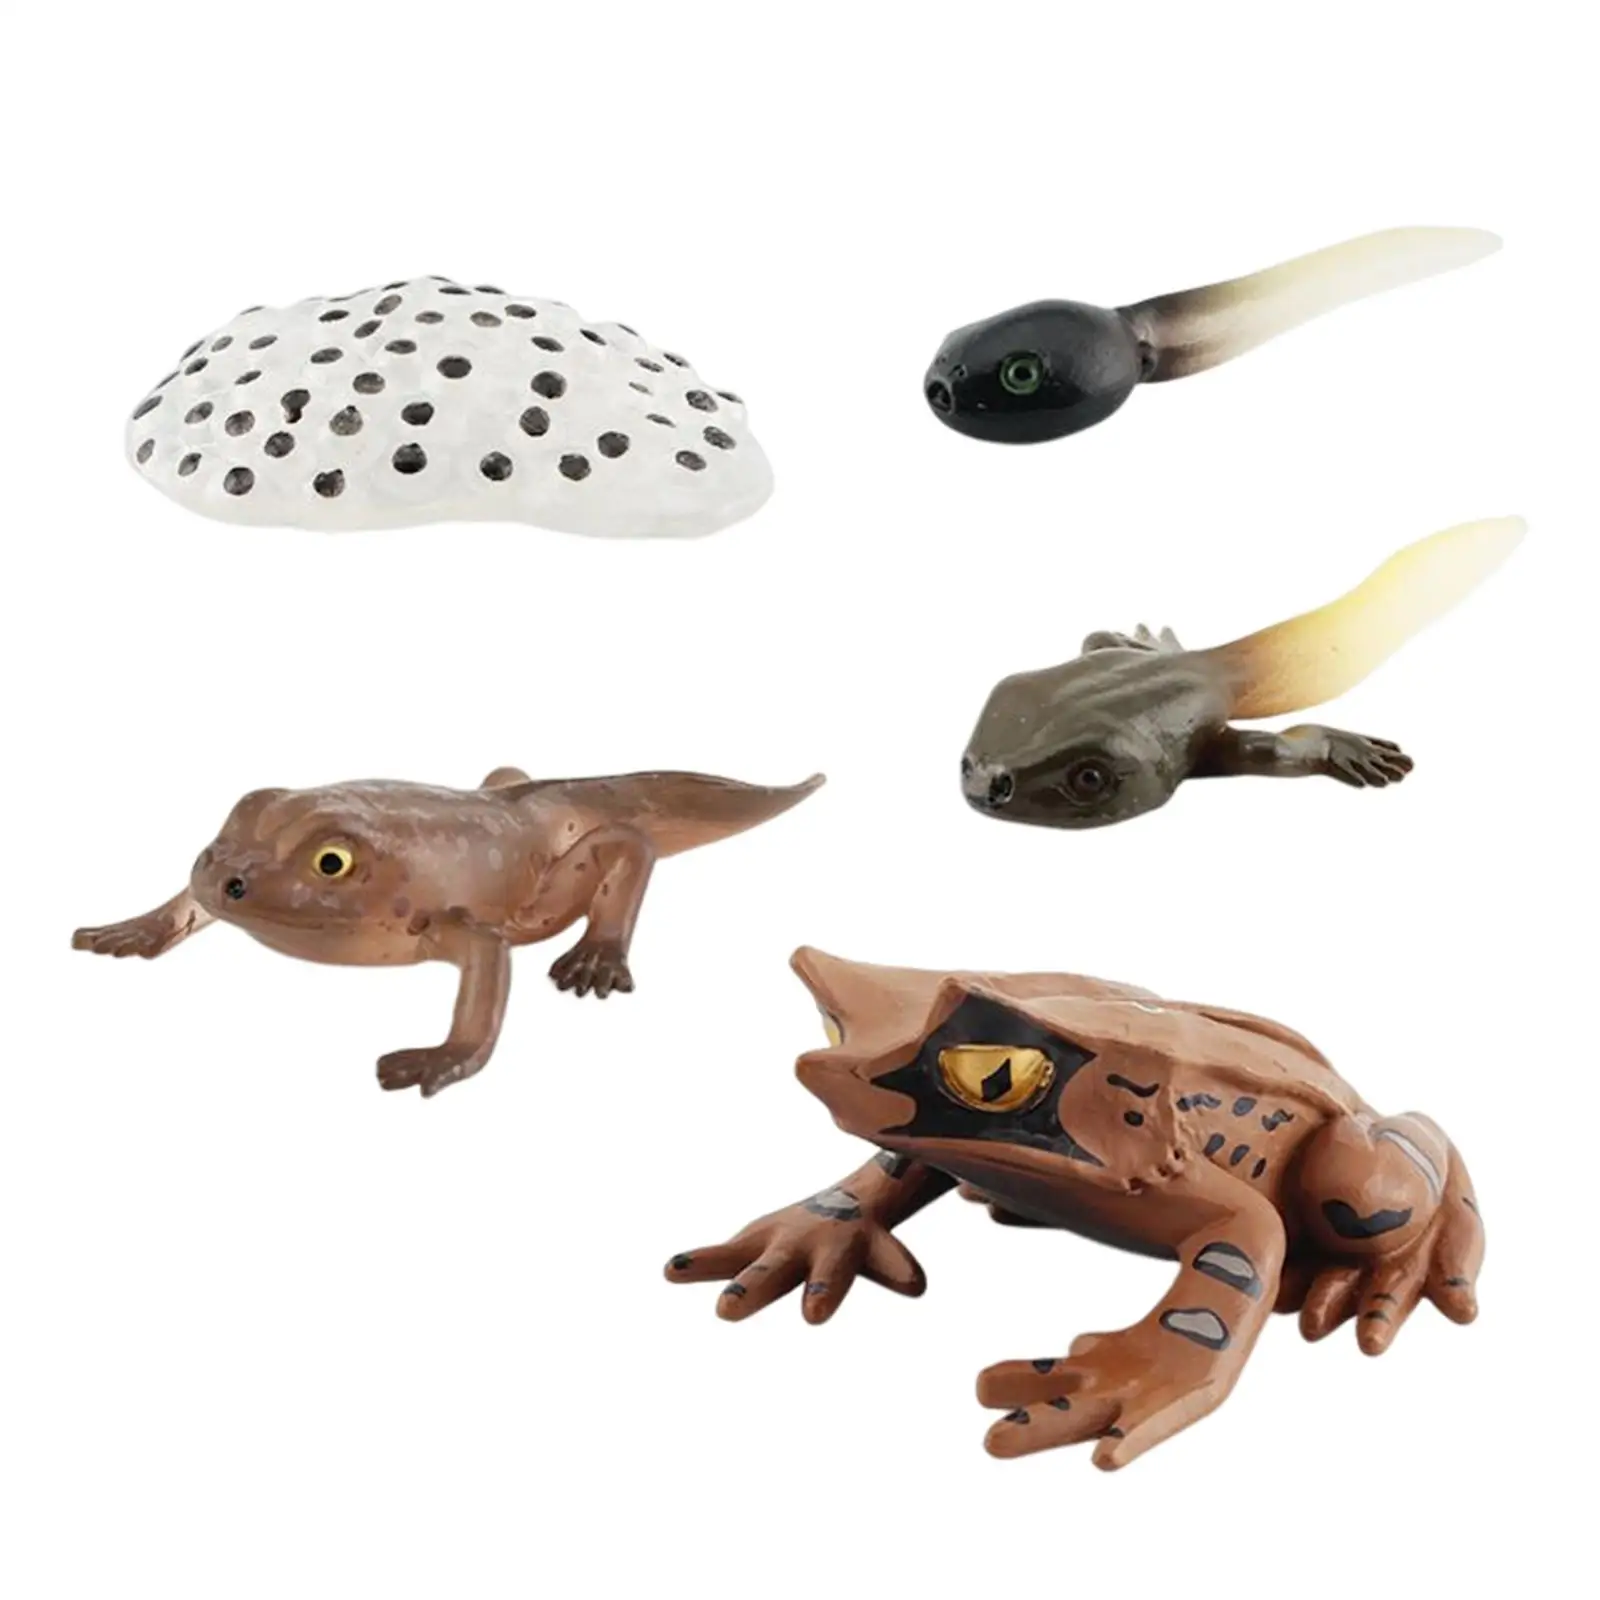 Life Cycle Figurines Realistic Animal Figurines Learning Prop Frogs Life Cycle Model for Toddlers Kids Project Development Toys